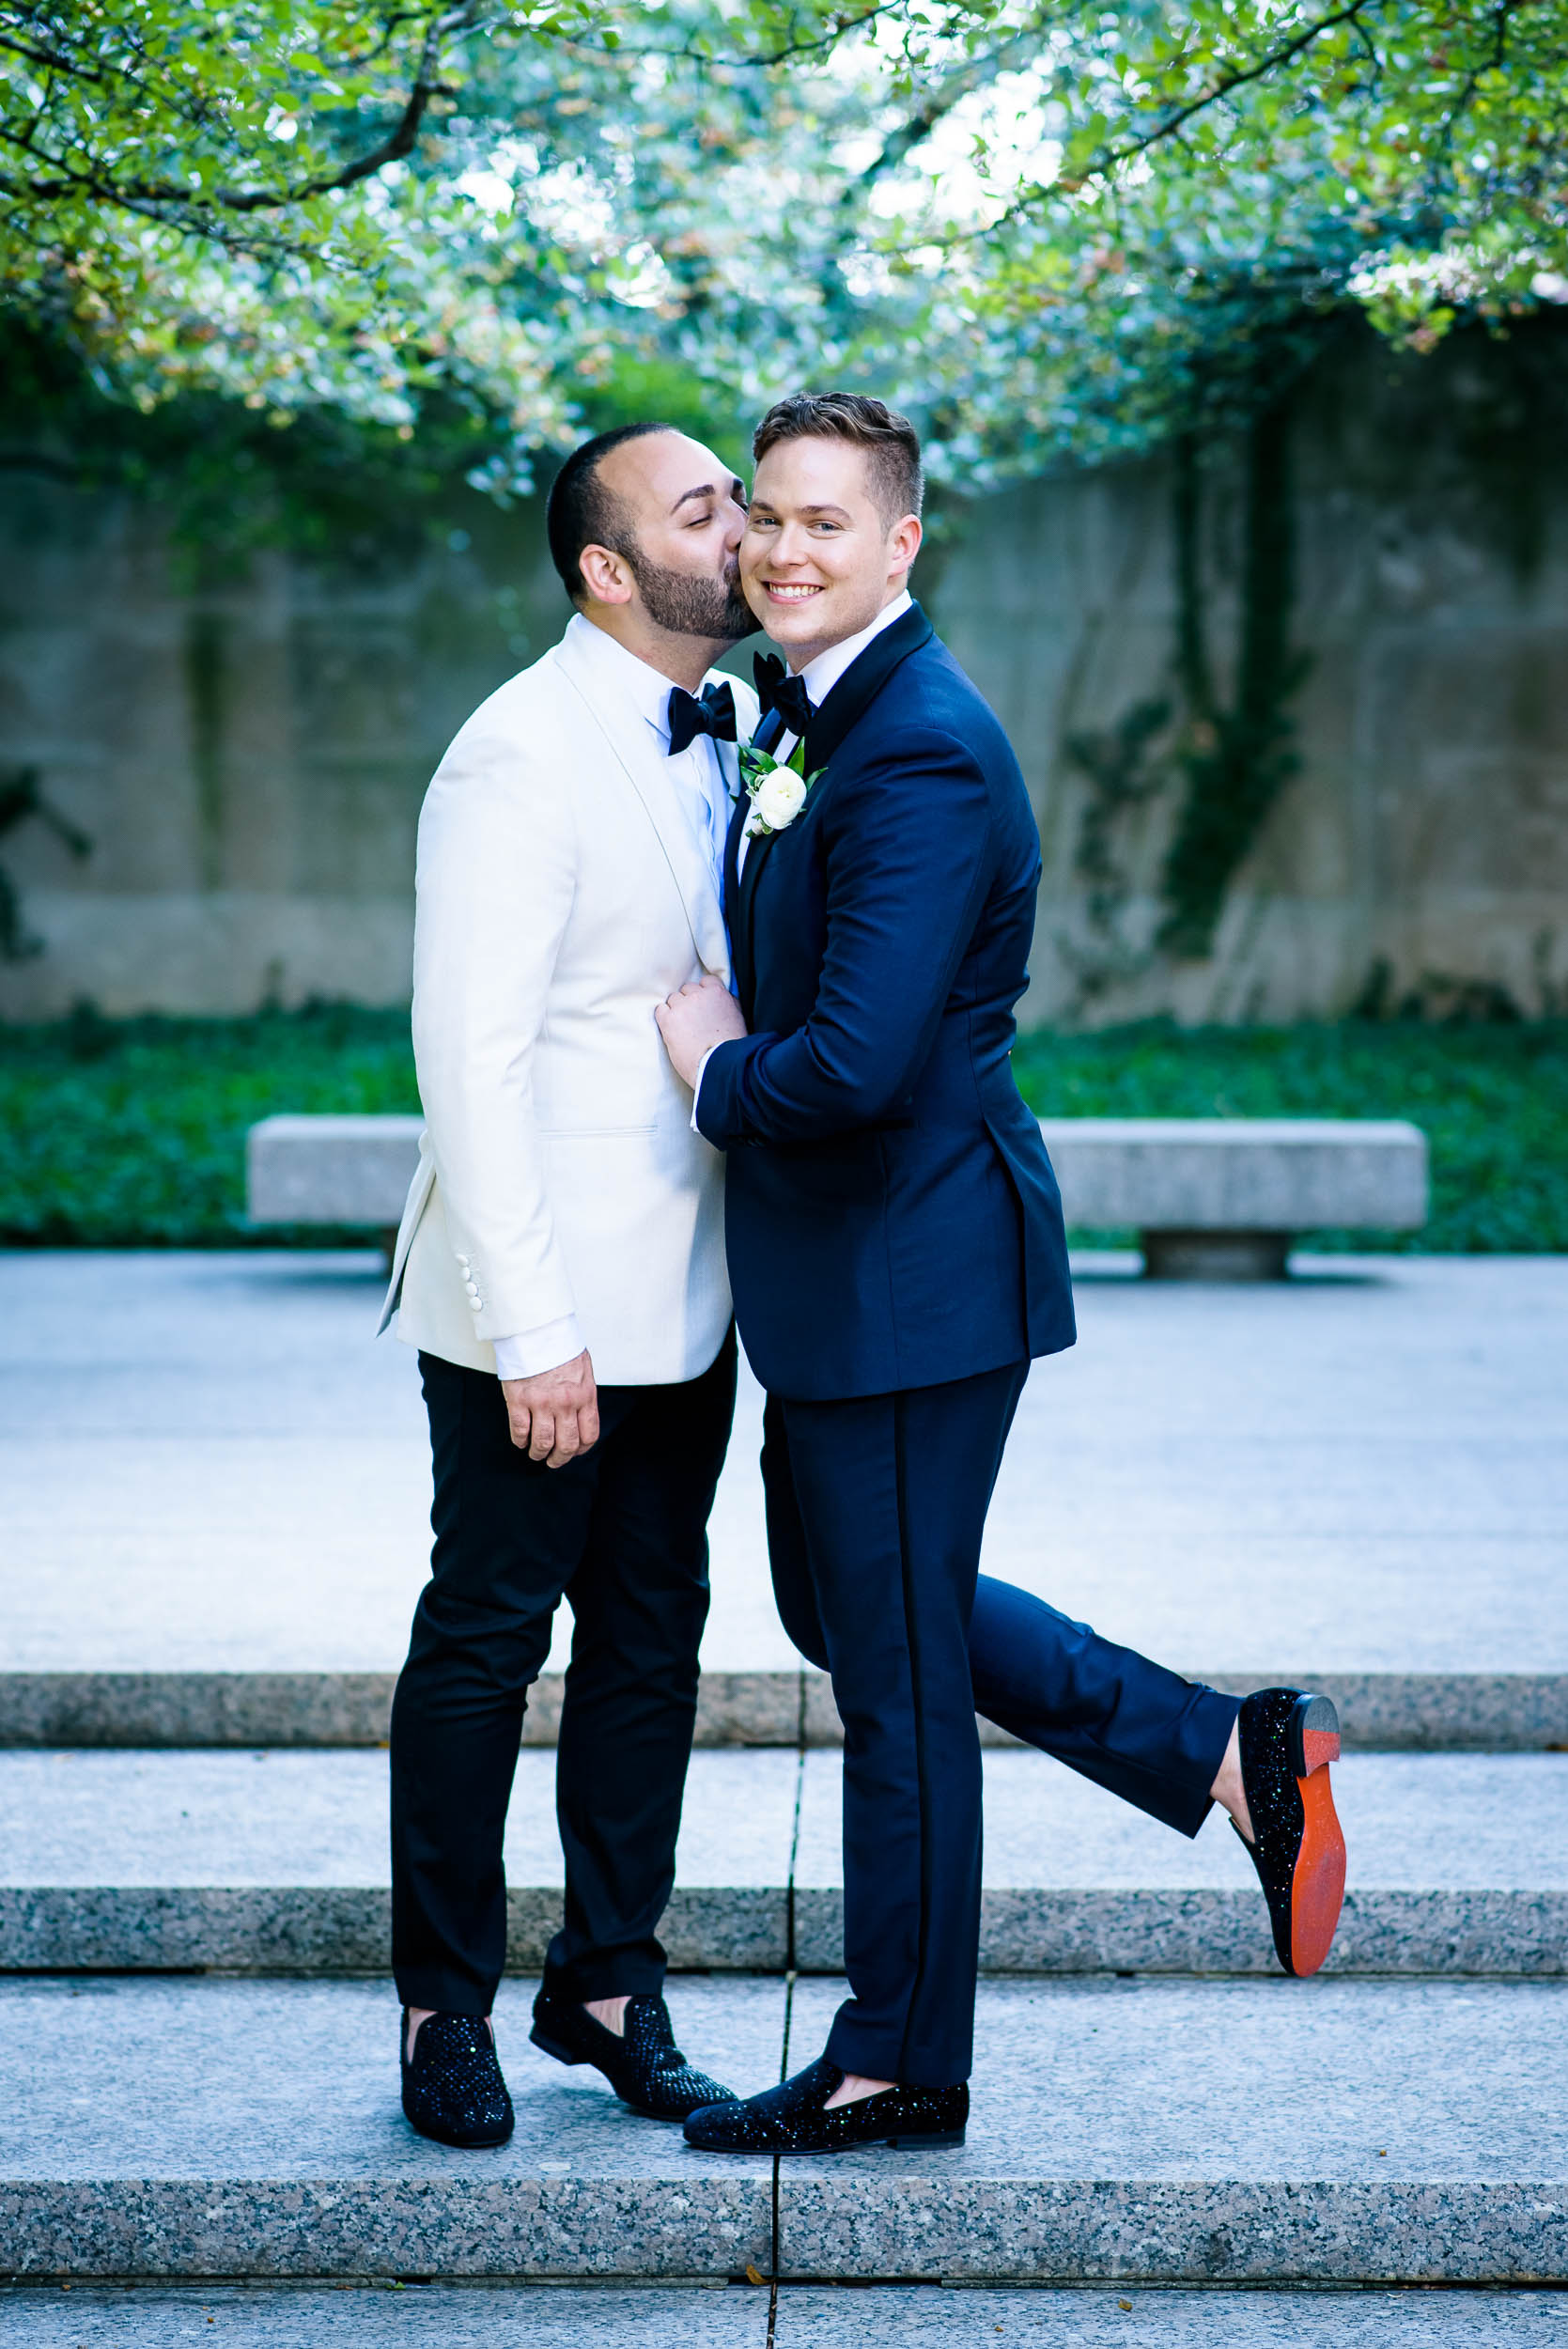 Outdoor wedding photos for same-sex, luxurious fall wedding at the Chicago Symphony Center captured by J. Brown Photography. See more wedding ideas at jbrownphotography.com!